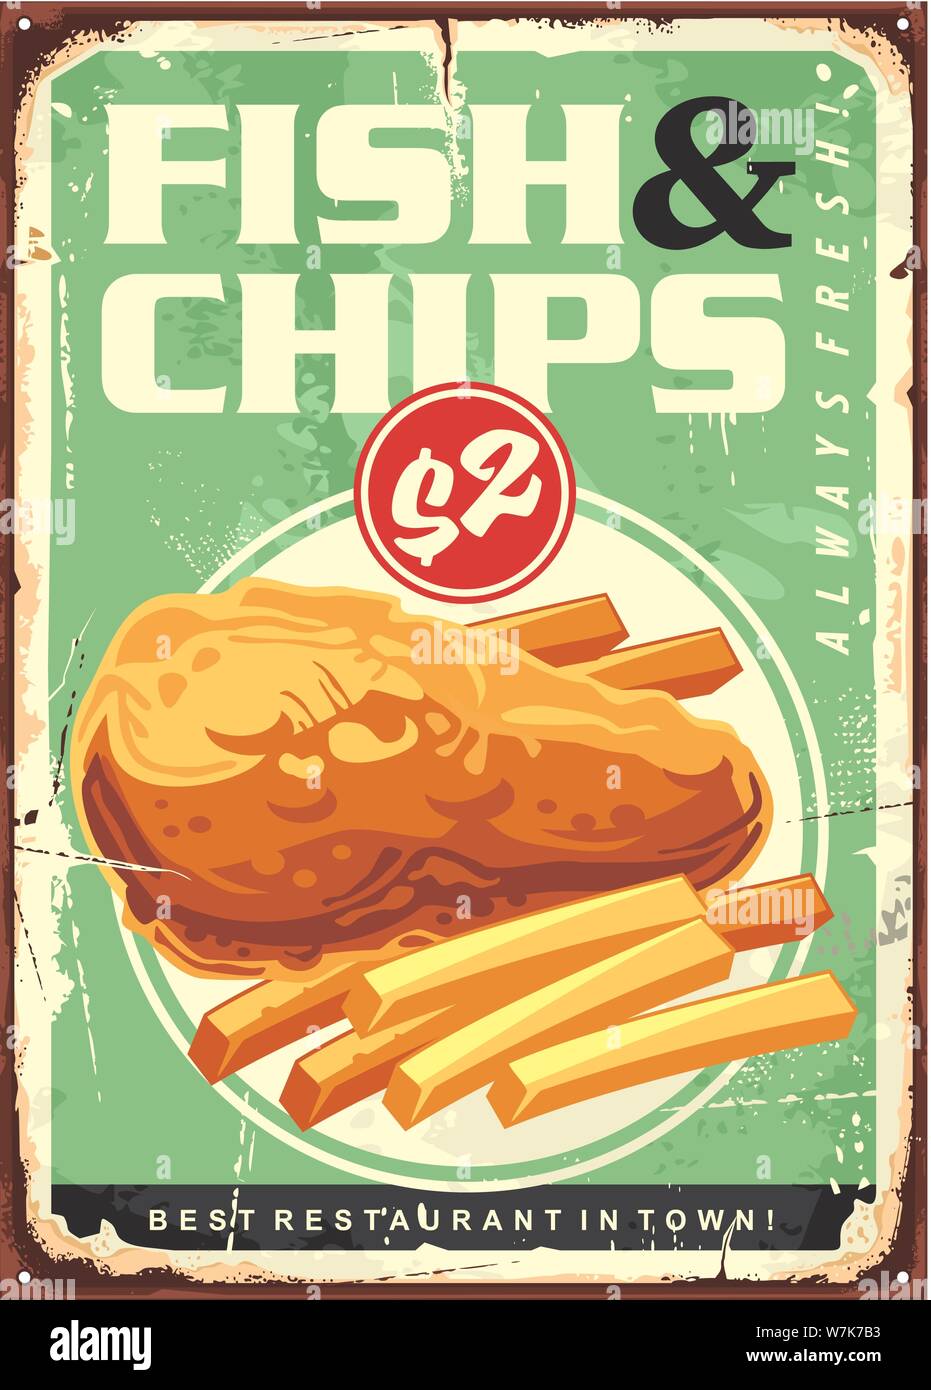 Fish and chips retro ad tin sign design. Fried fish fillet with fries vintage advertising. British traditional food vector illustration. Stock Vector